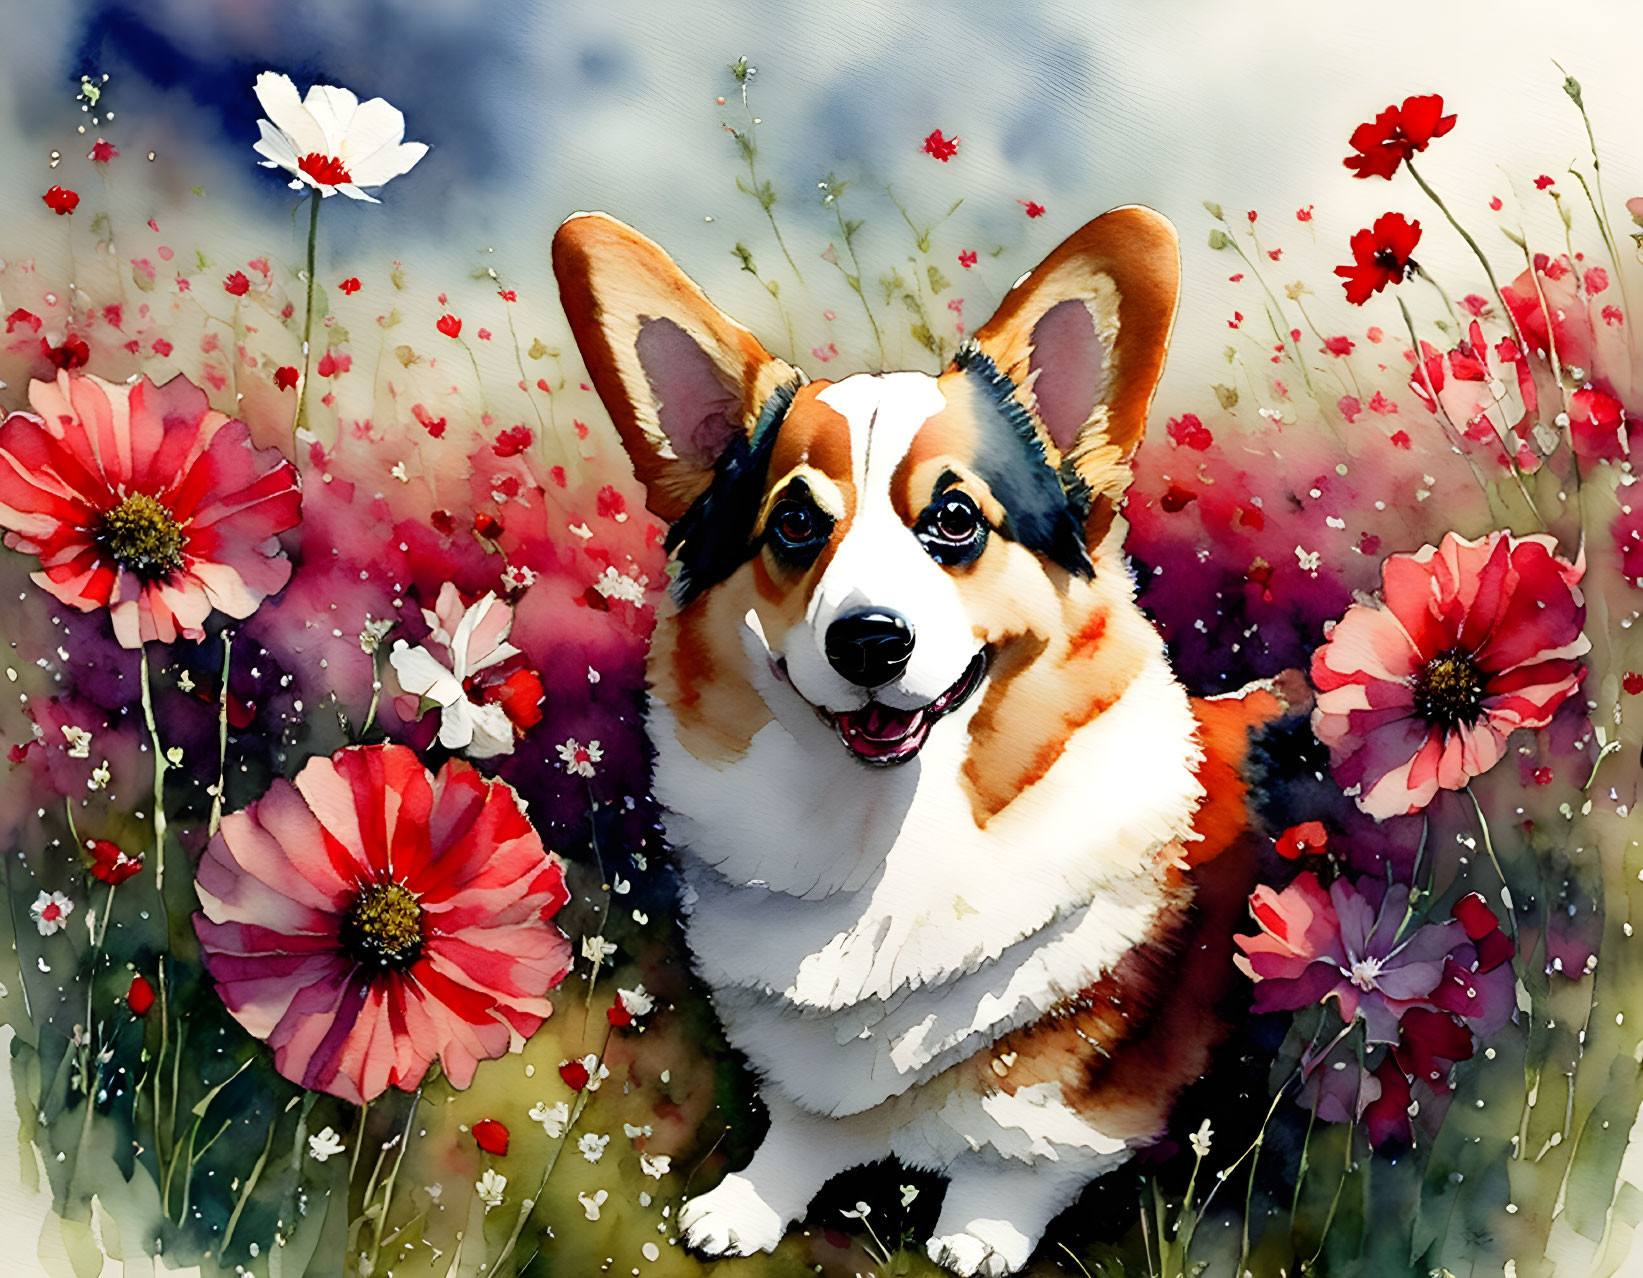 Cheerful corgi among red and white flowers in watercolor style